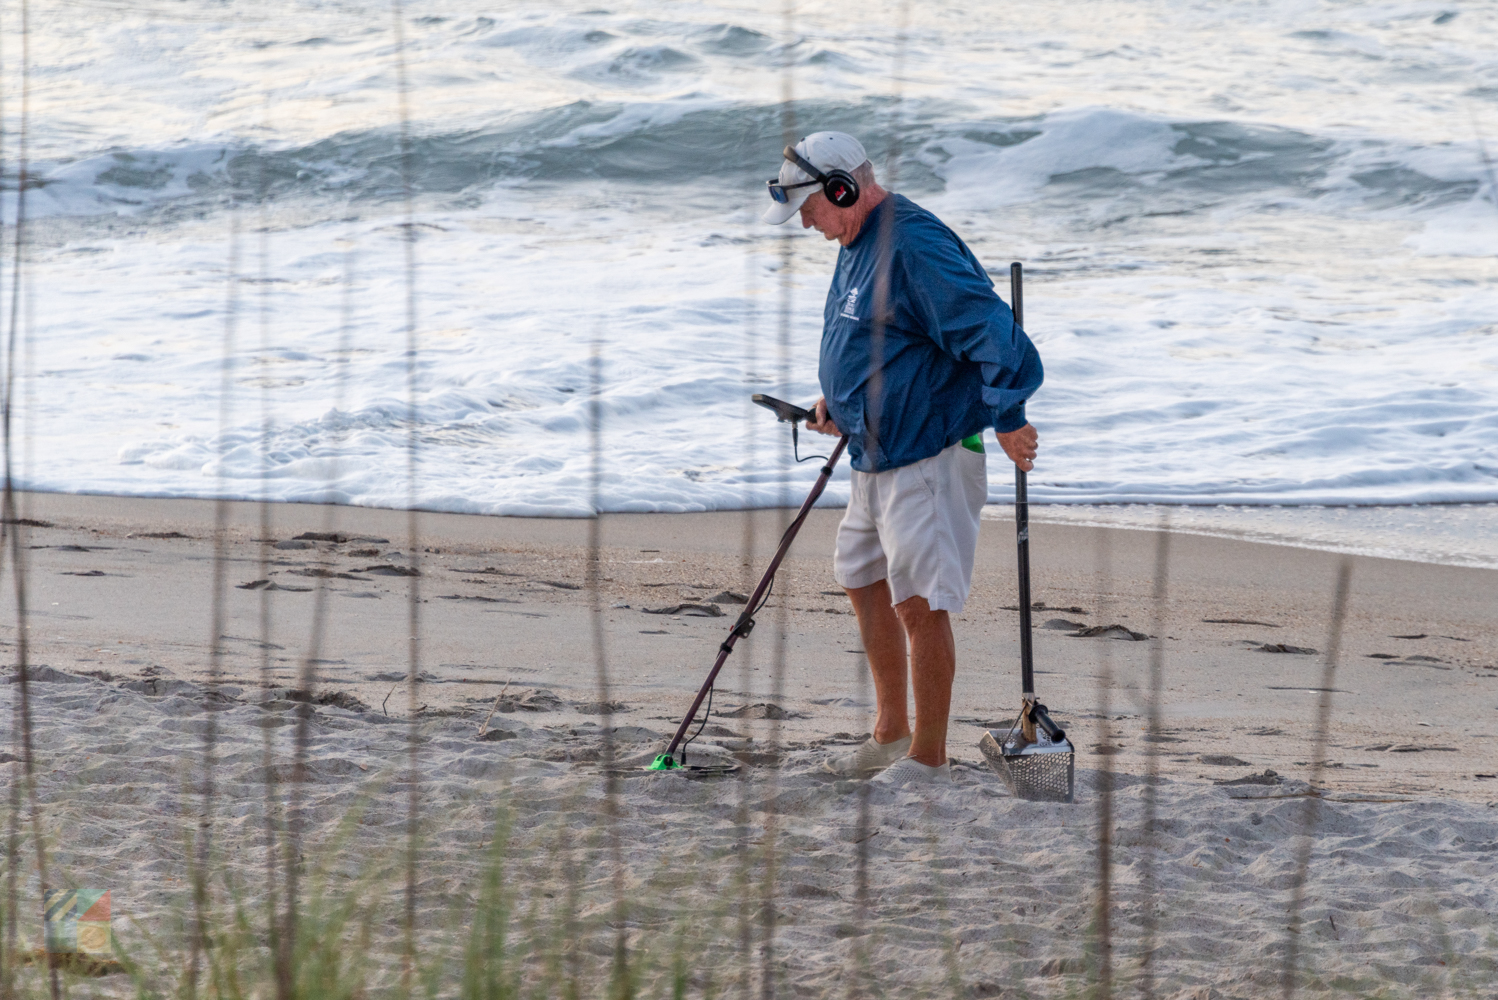 A man metal detecting on the beach